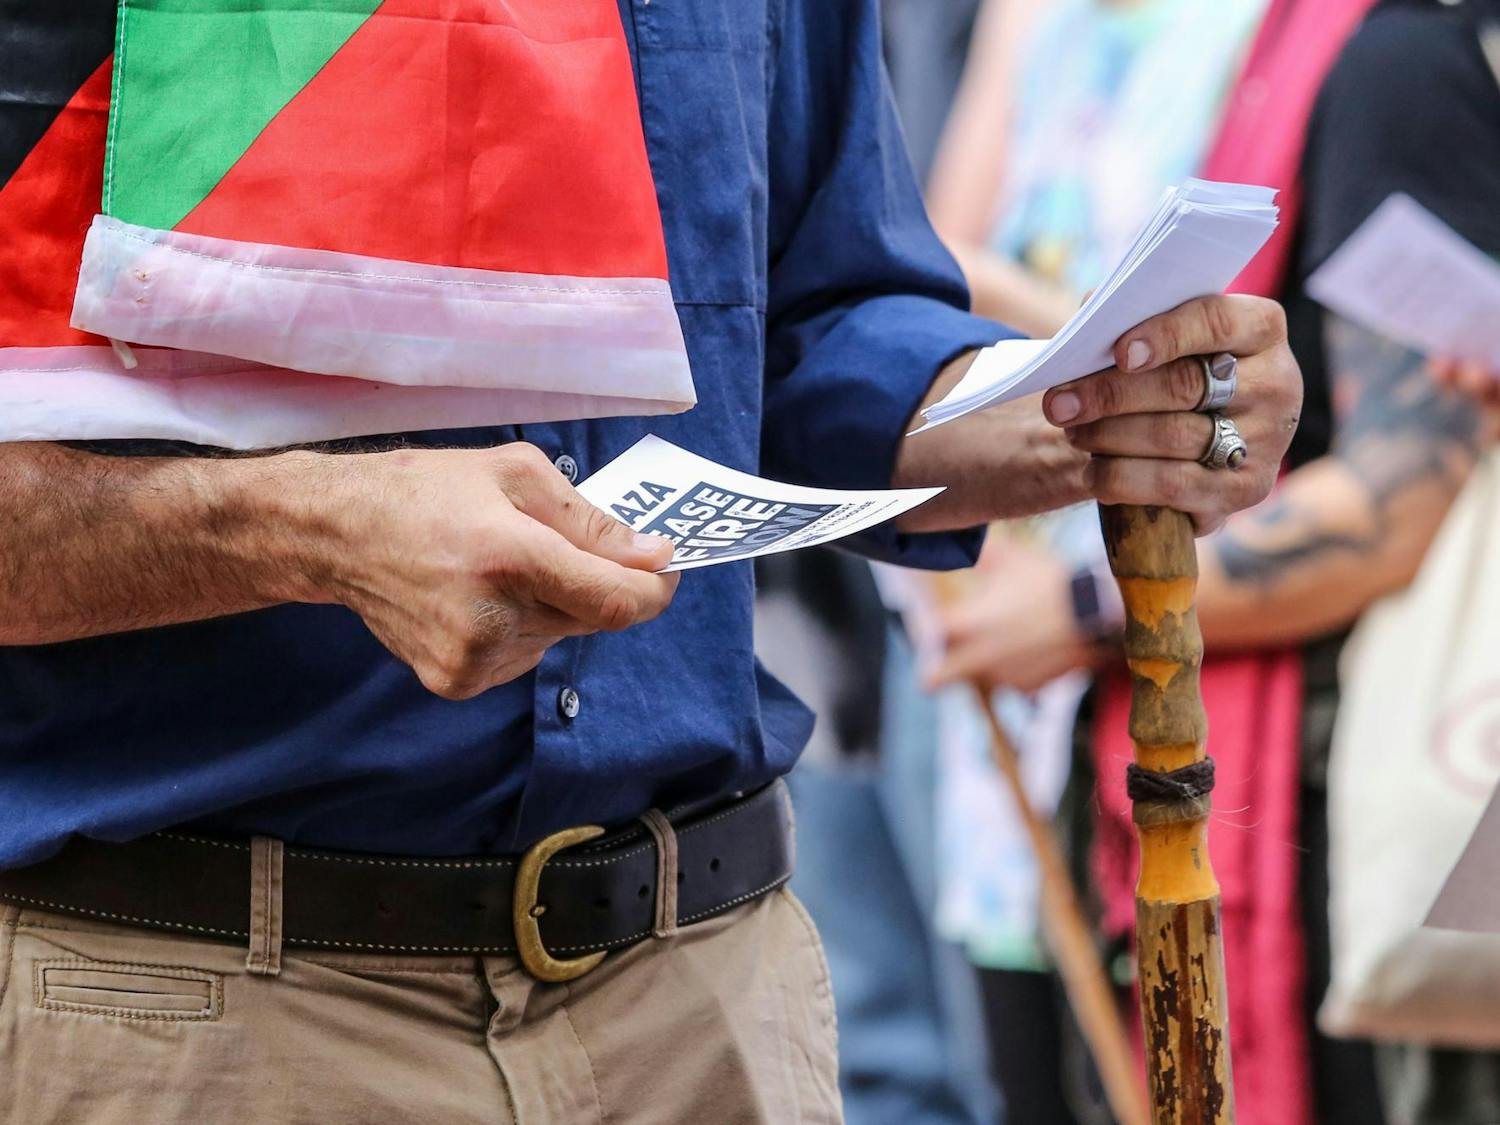 An attendee hands out leaflets during a walkout for Palestine on the Russell House Patio on Nov. 9, 2023. The leaflets contained information from the Carolina Peace Resource Center on pro-Palestinian protests held every Friday at the Statehouse.